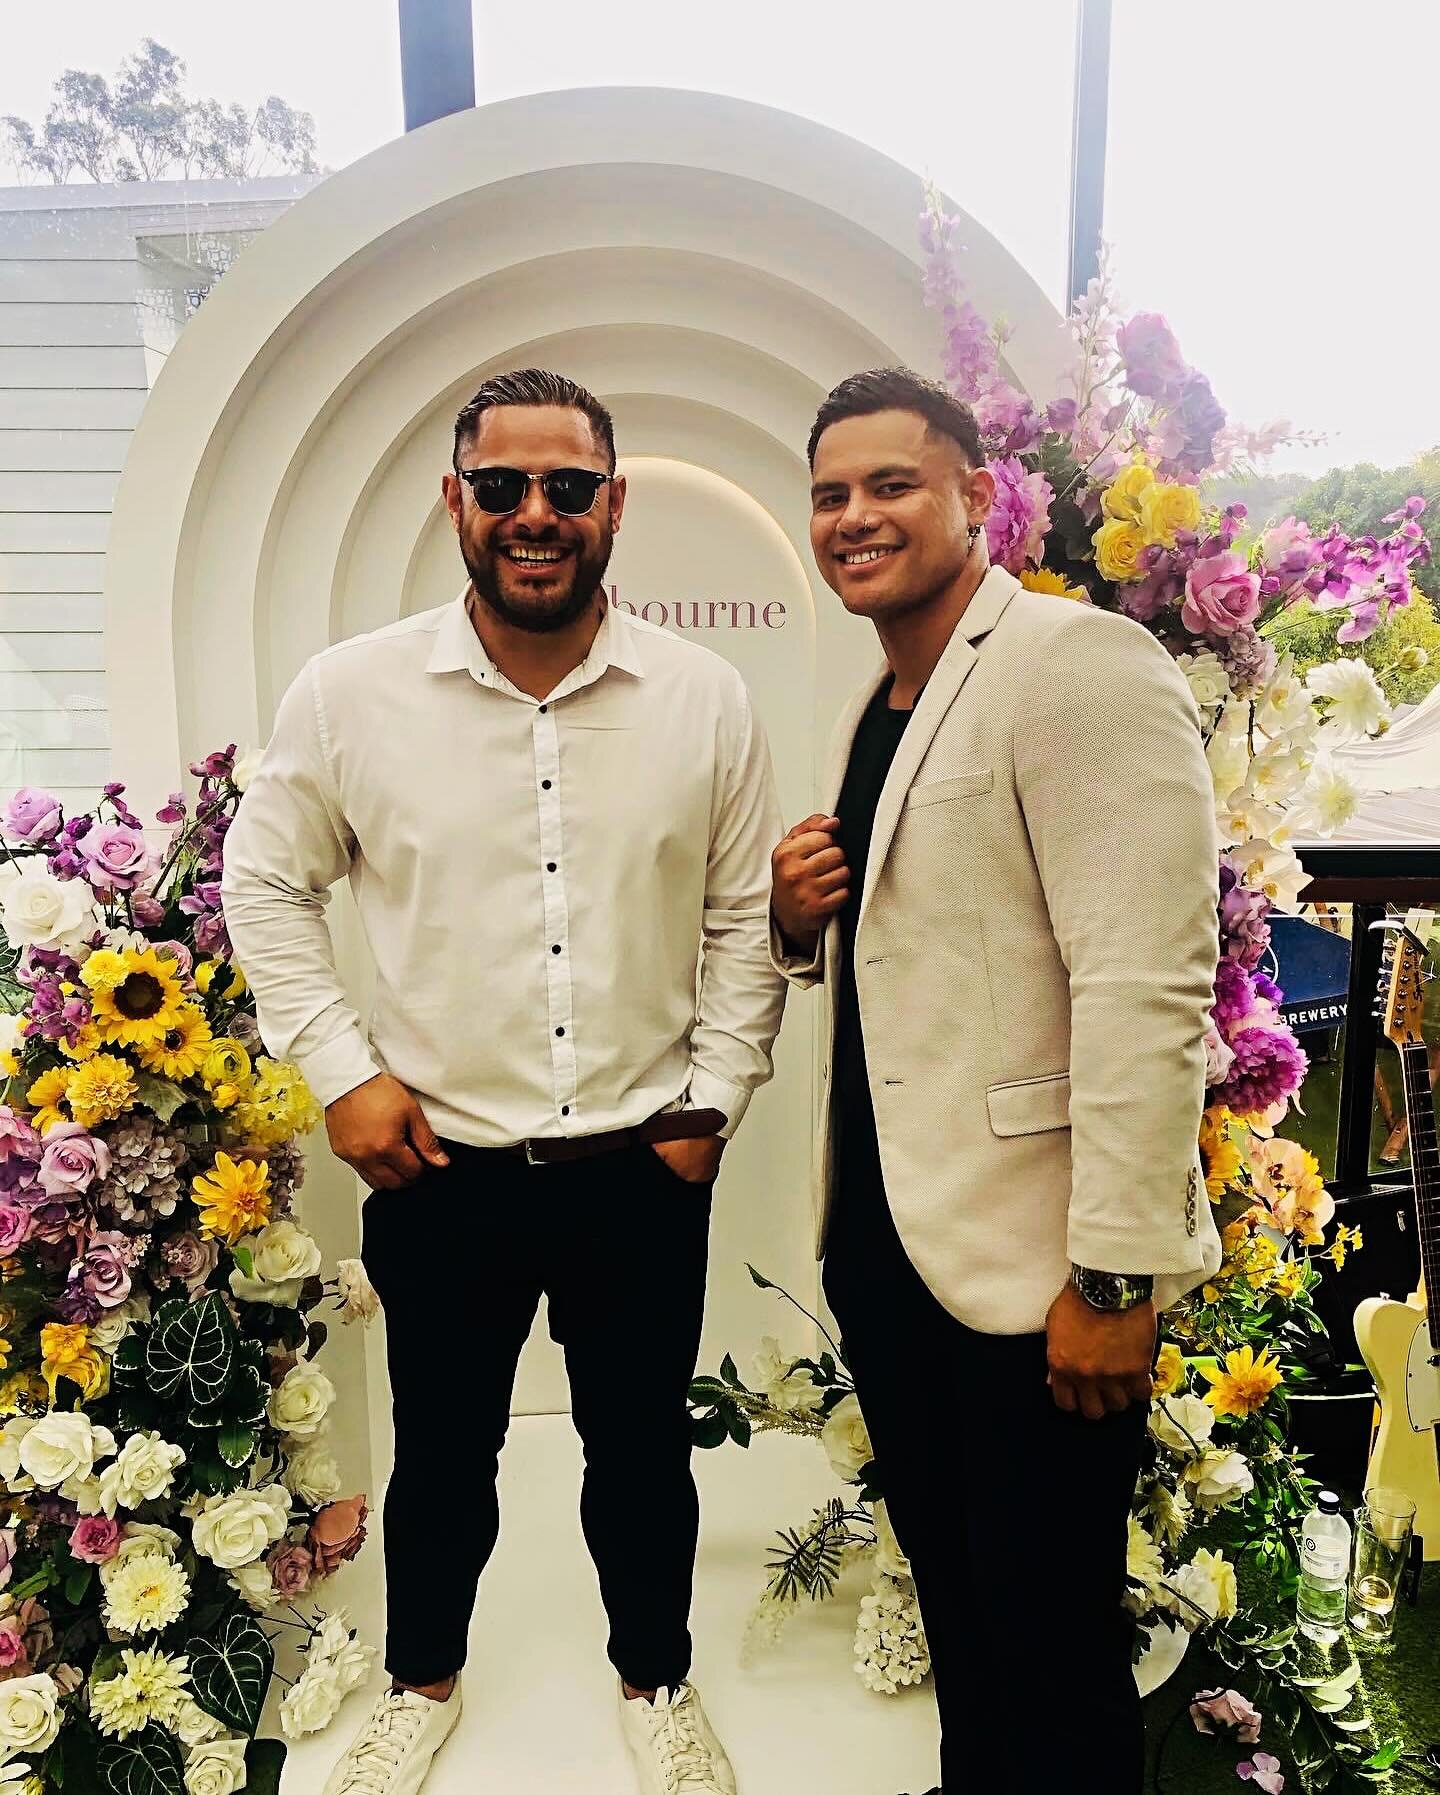 Fonoti Bros ready to deliver some tunes for Melb Cup! 🥂🐎🤩

#fonotiband #musicthatmoves #mcgee #mcgeeentertainment #noahfonoti #yacfonoti